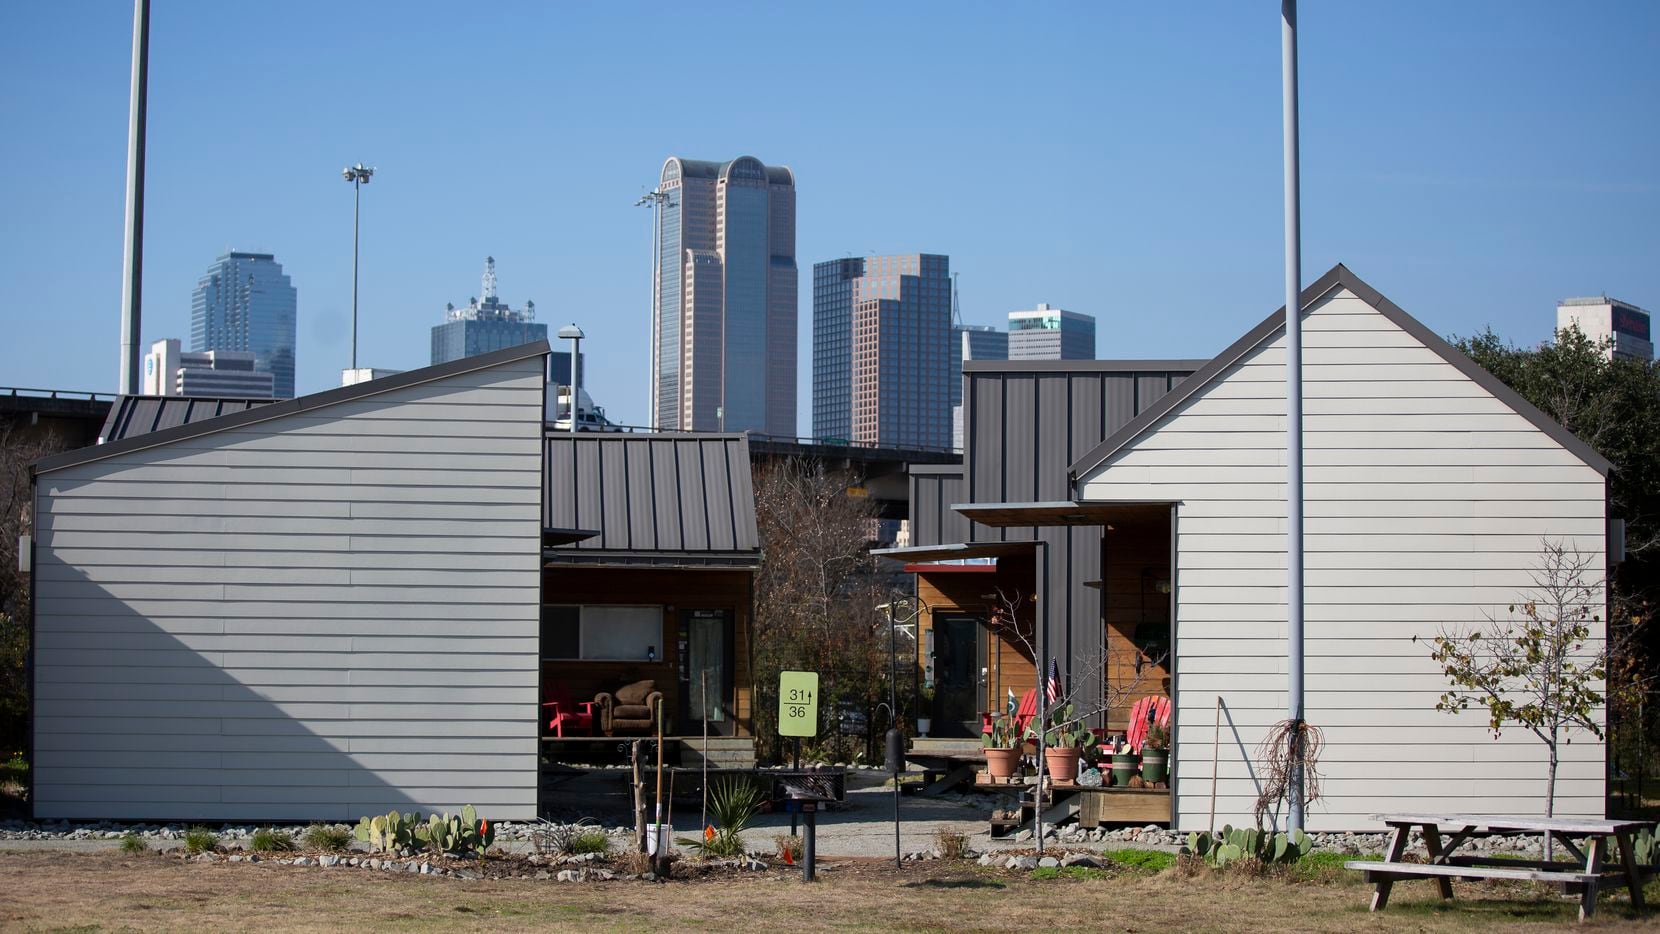 The Cottages at Hickory Crossing, a project administered by nonprofit CitySquare, is a community of 50 micro-houses designed to provide housing for homeless individuals. (Juan Figueroa/The Dallas Morning News)